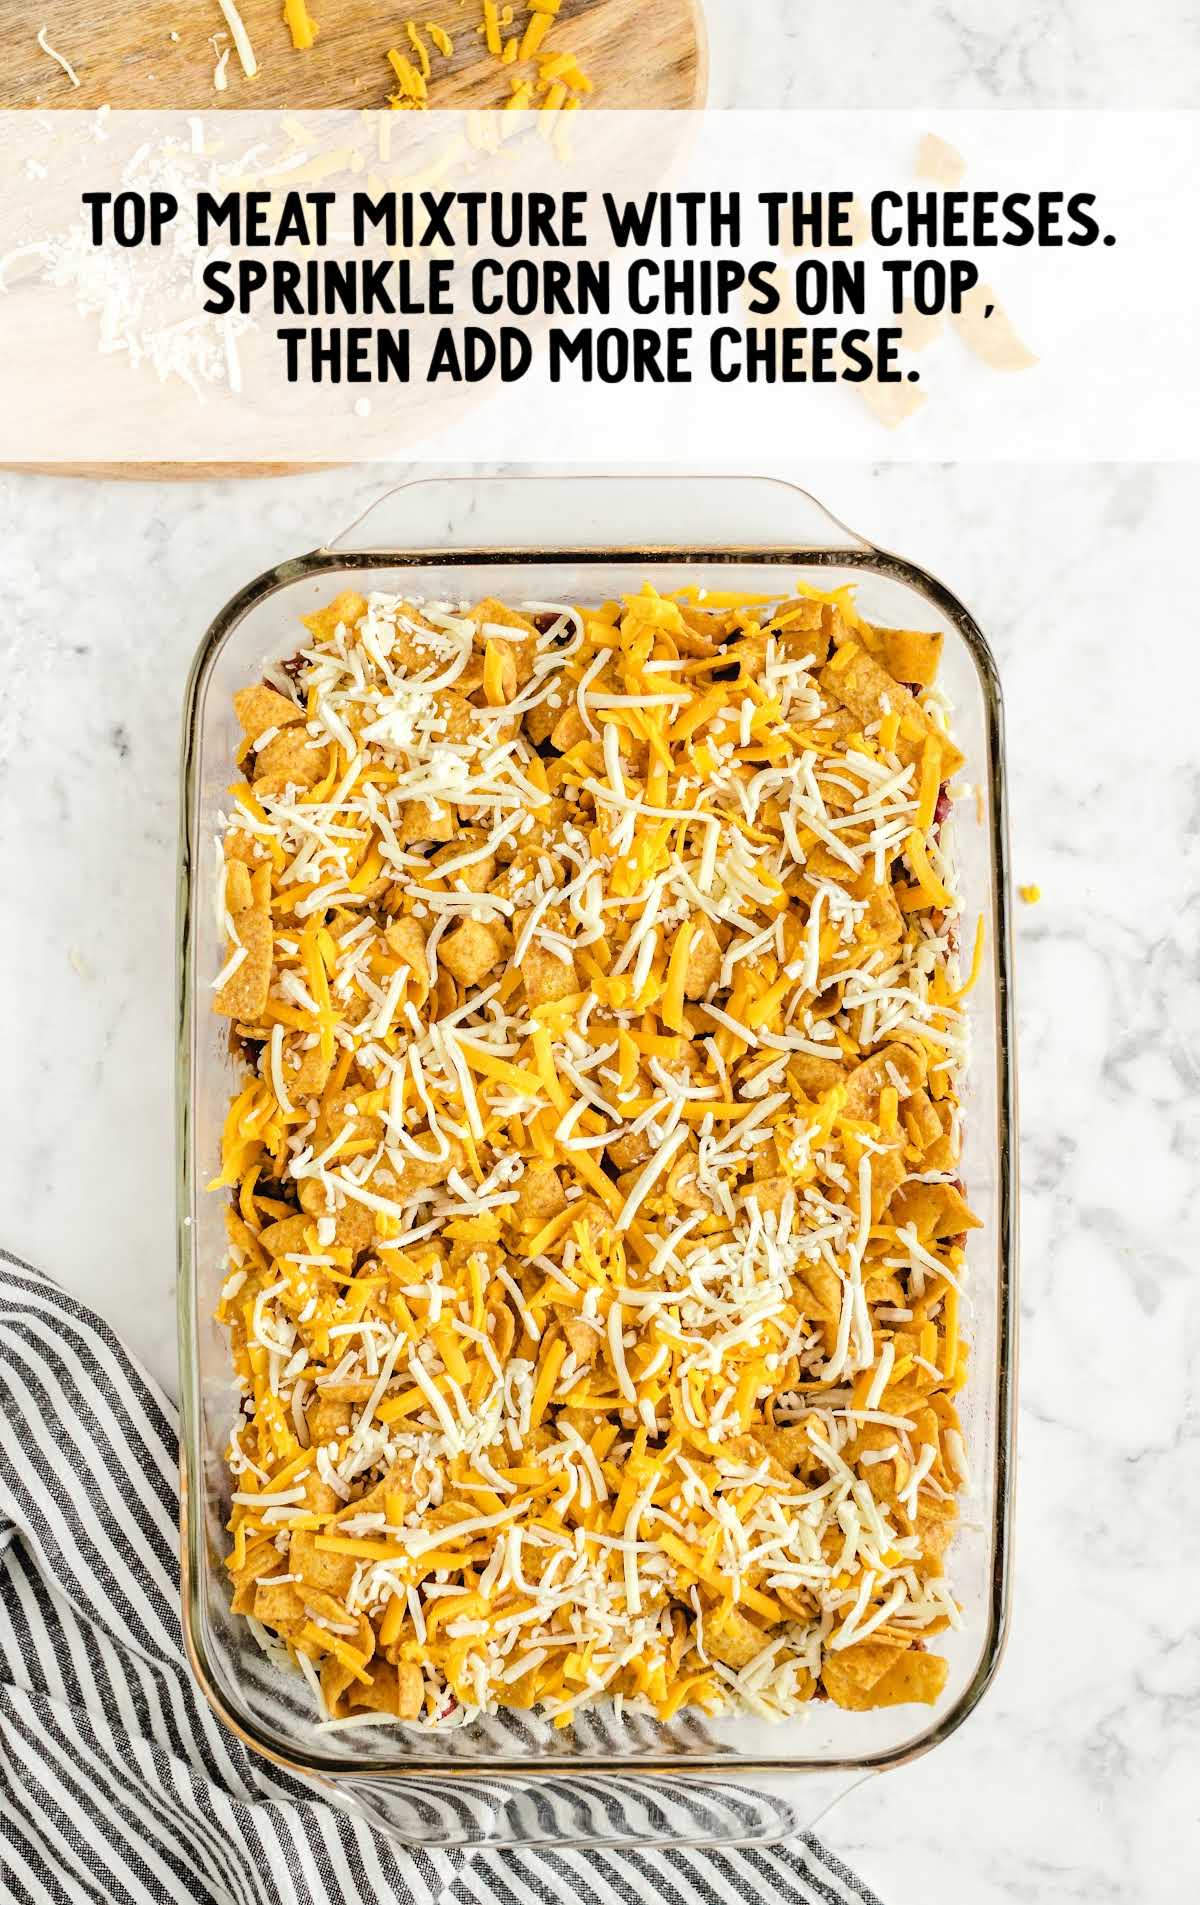 cheese and corn chips sprinkled on top of the mixture in a baking dish